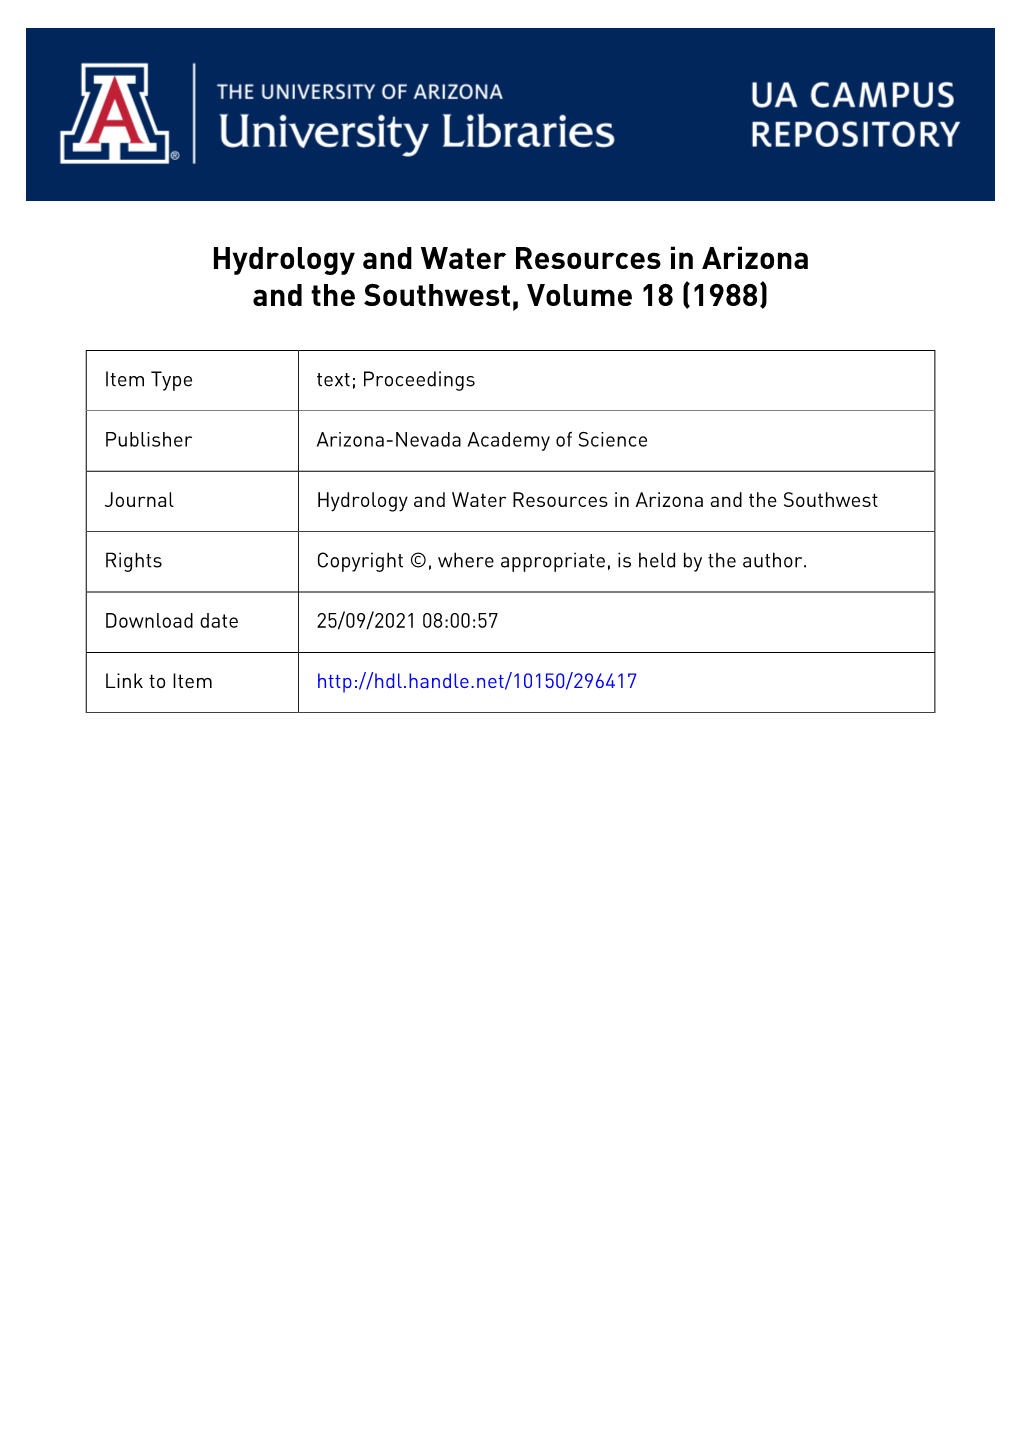 Hydrology and Water Resources in Arizona and the Southwest, Volume 18 (1988)